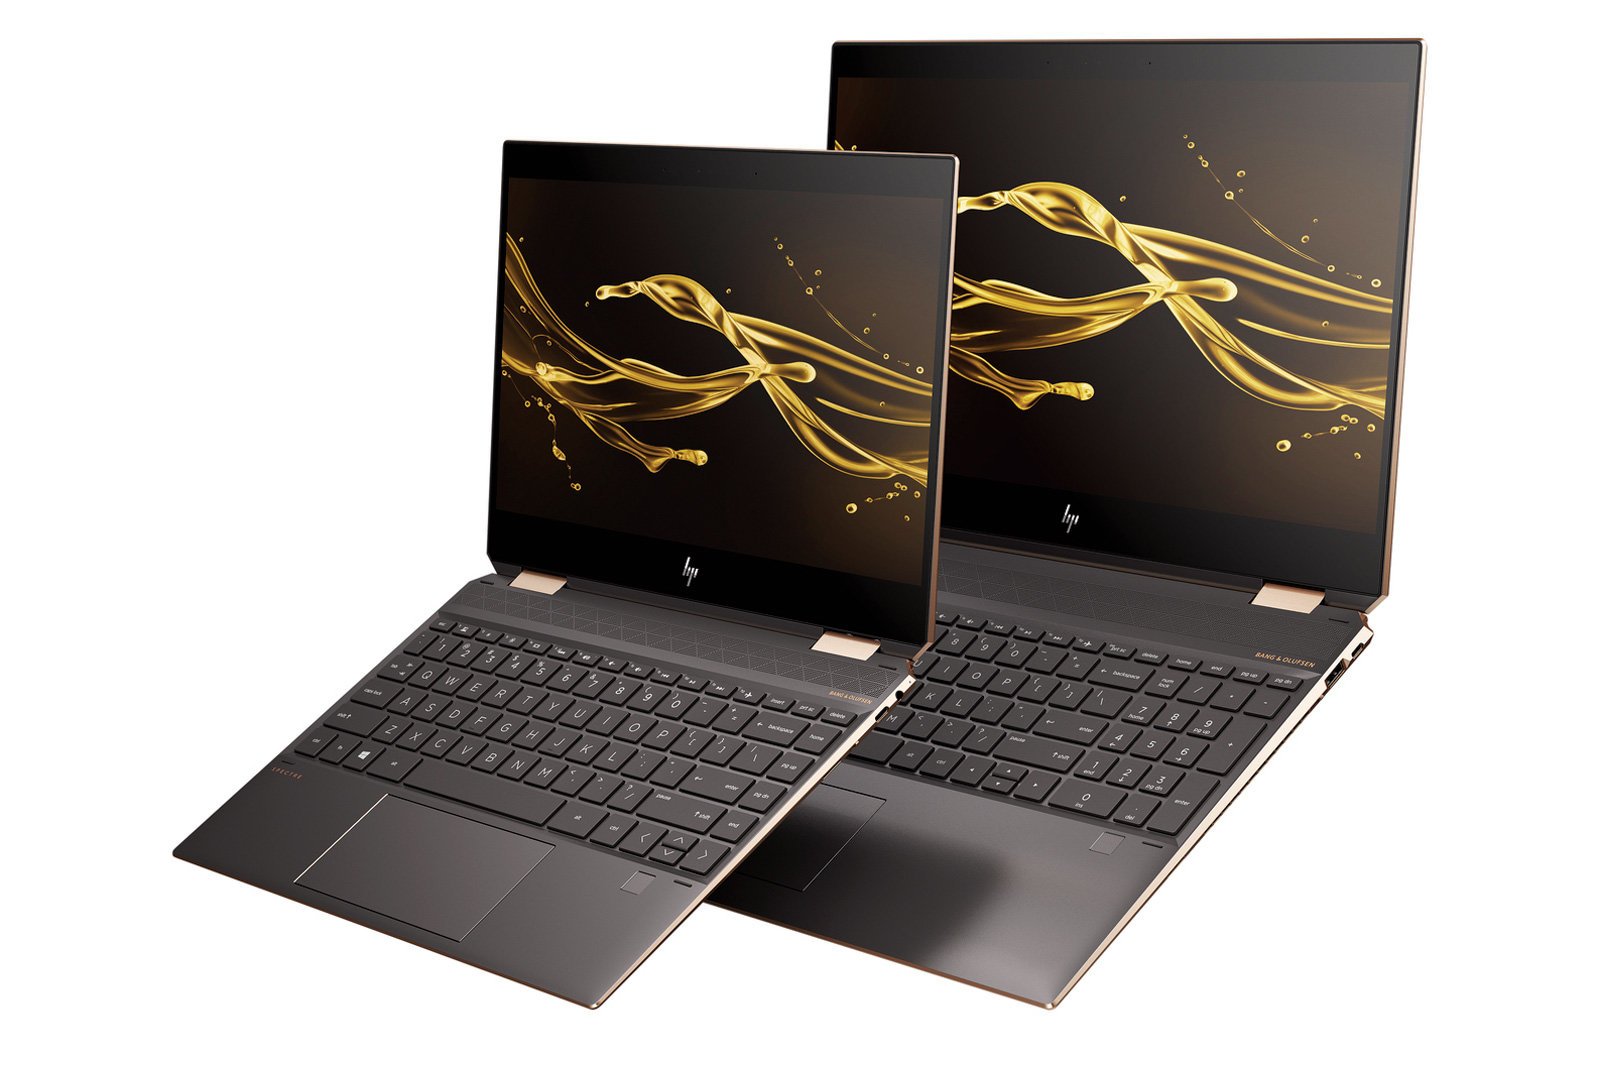 HP’s new Spectre x360 laptops proves you do not need ARM for 20+ hour battery life